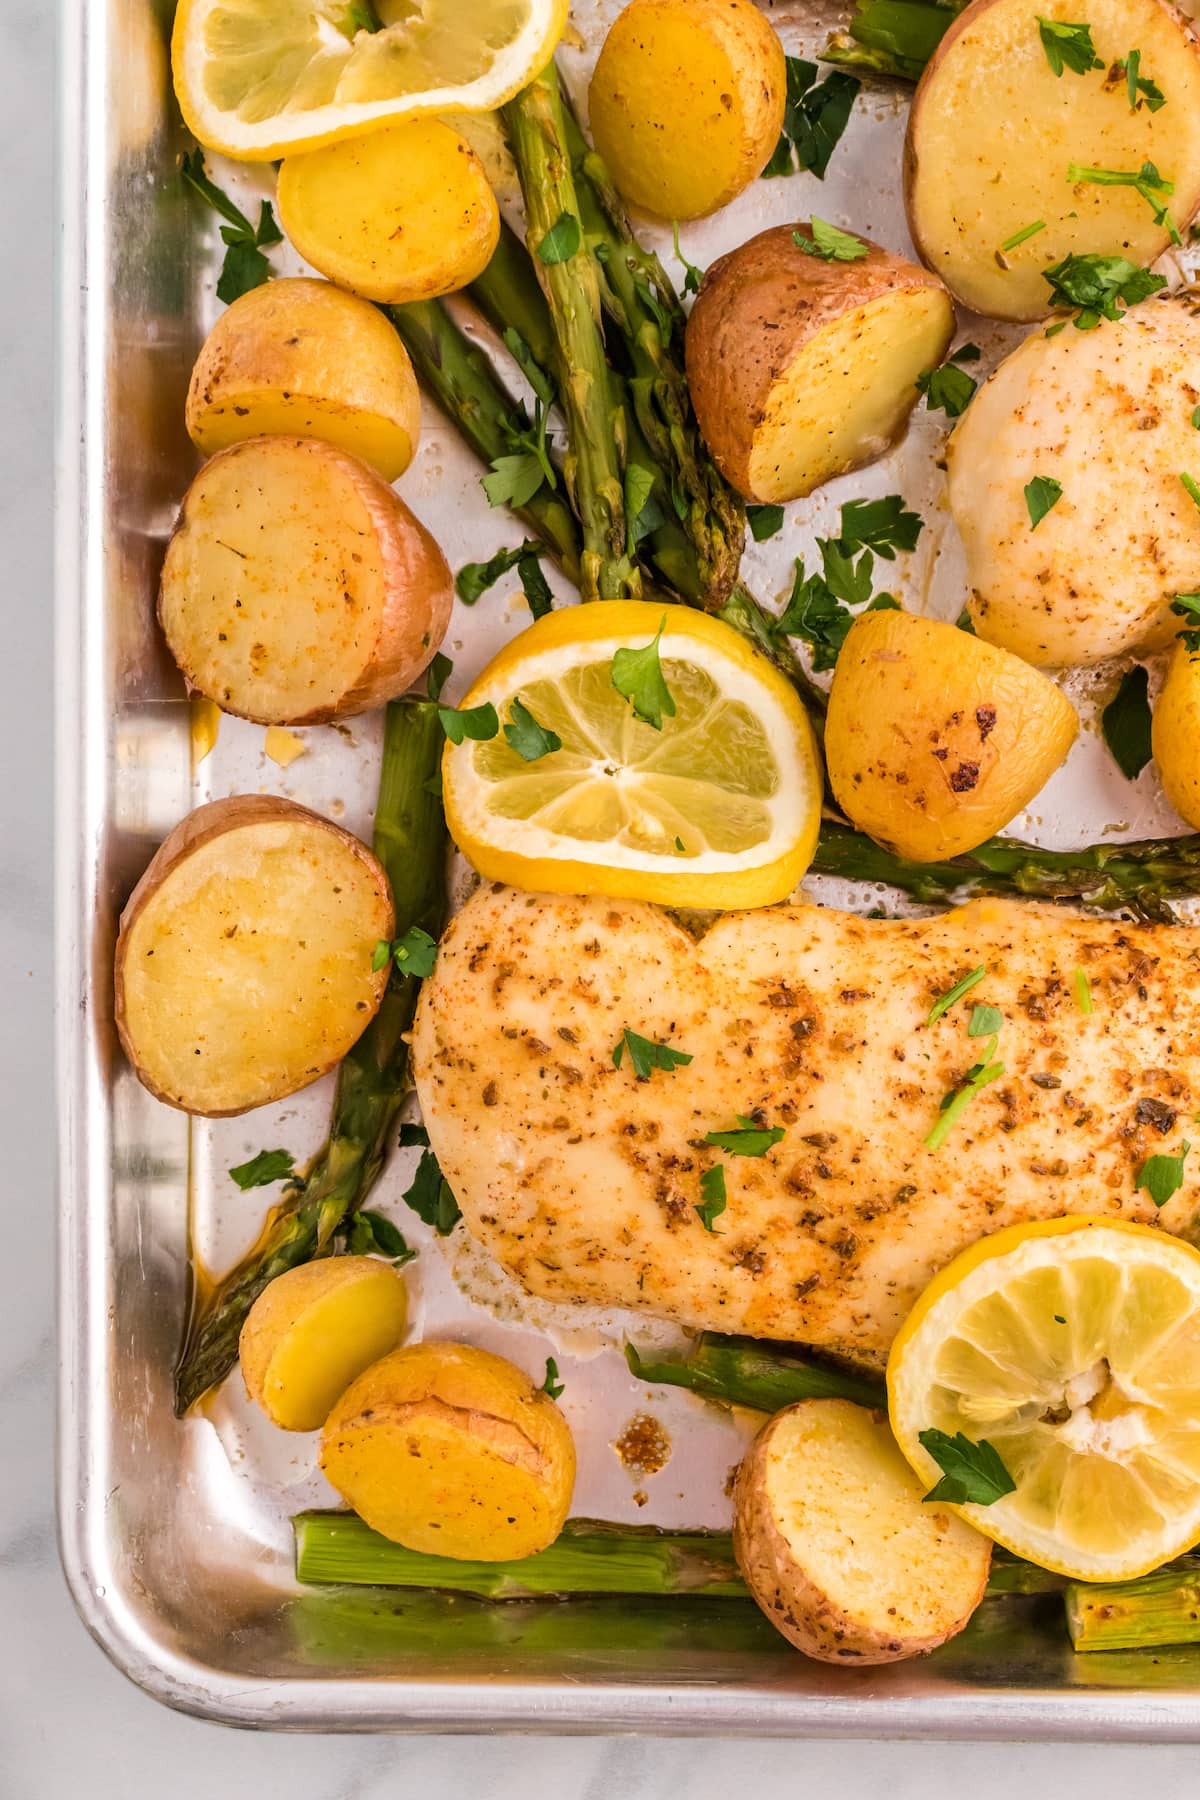 a sheet pan with baked chicken breasts, potatoes, lemon slices, and asparagus on it